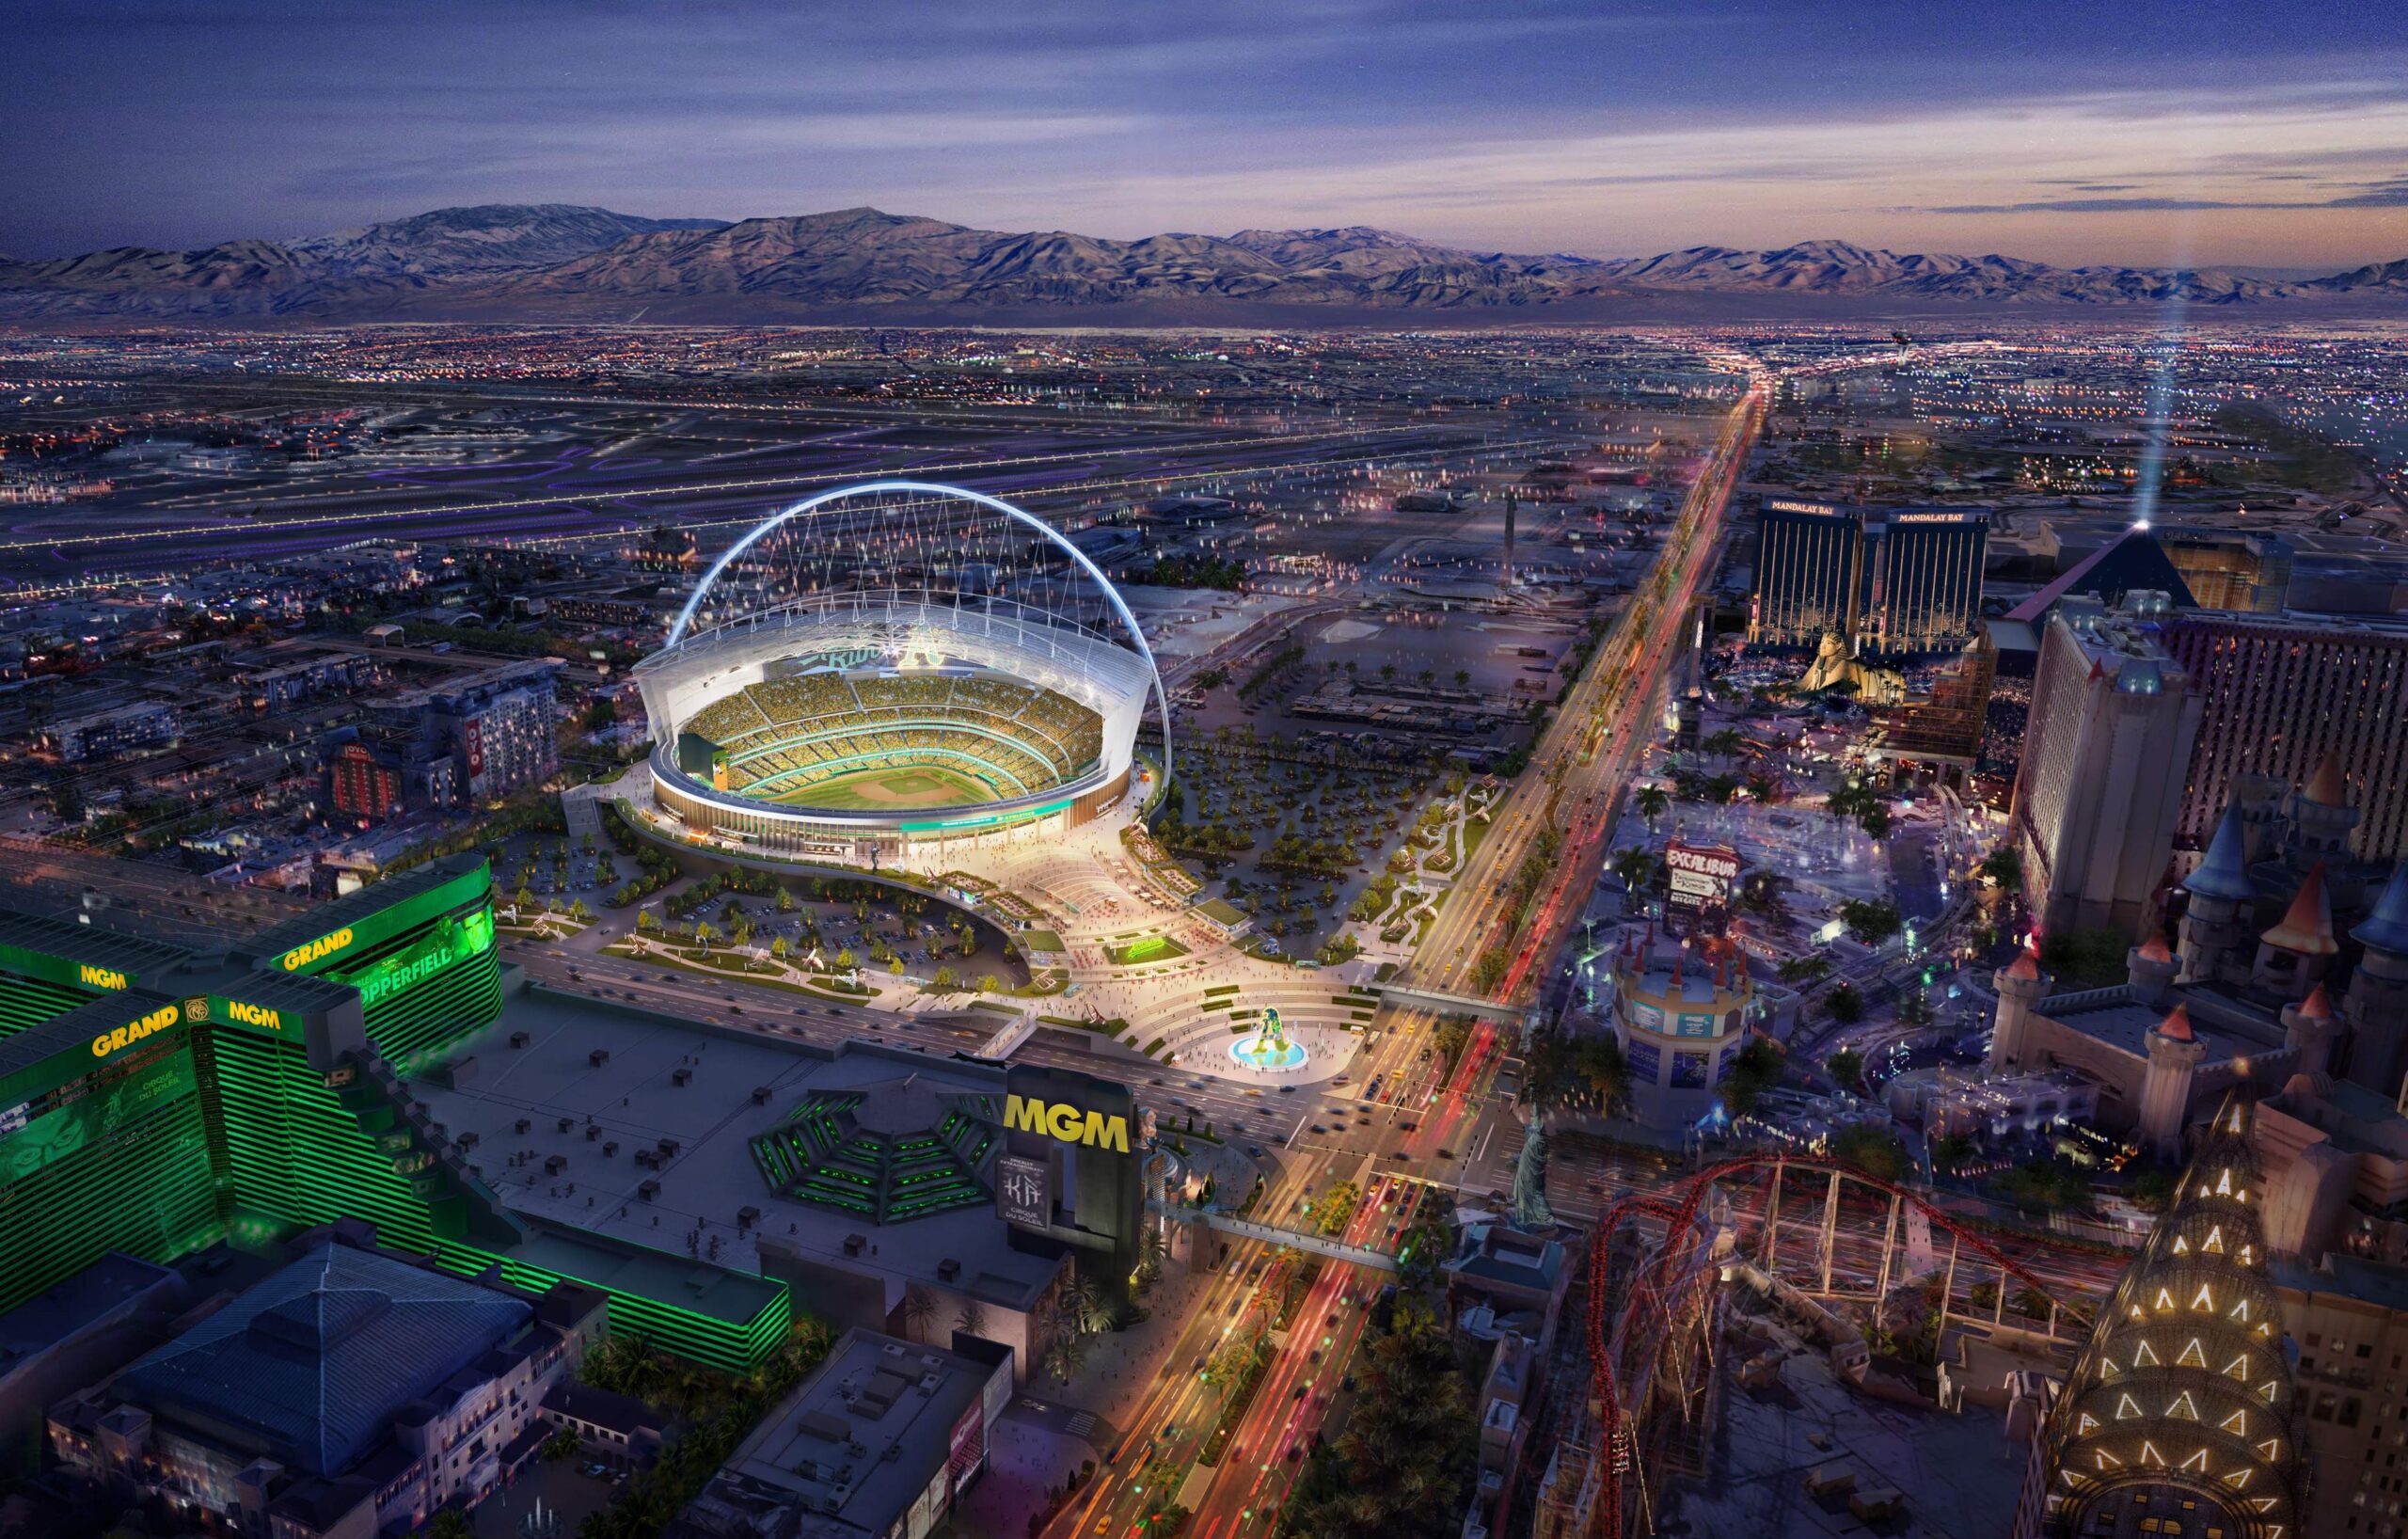 This rendering provided by the Oakland A's on May 26, 2023 of the team's proposed $1.5 billion, 33,000-seat ballpark on the site of the Tropicana will be replaced soon by a new set of renderings, according to the club officials. (Courtesy Oakland A's).